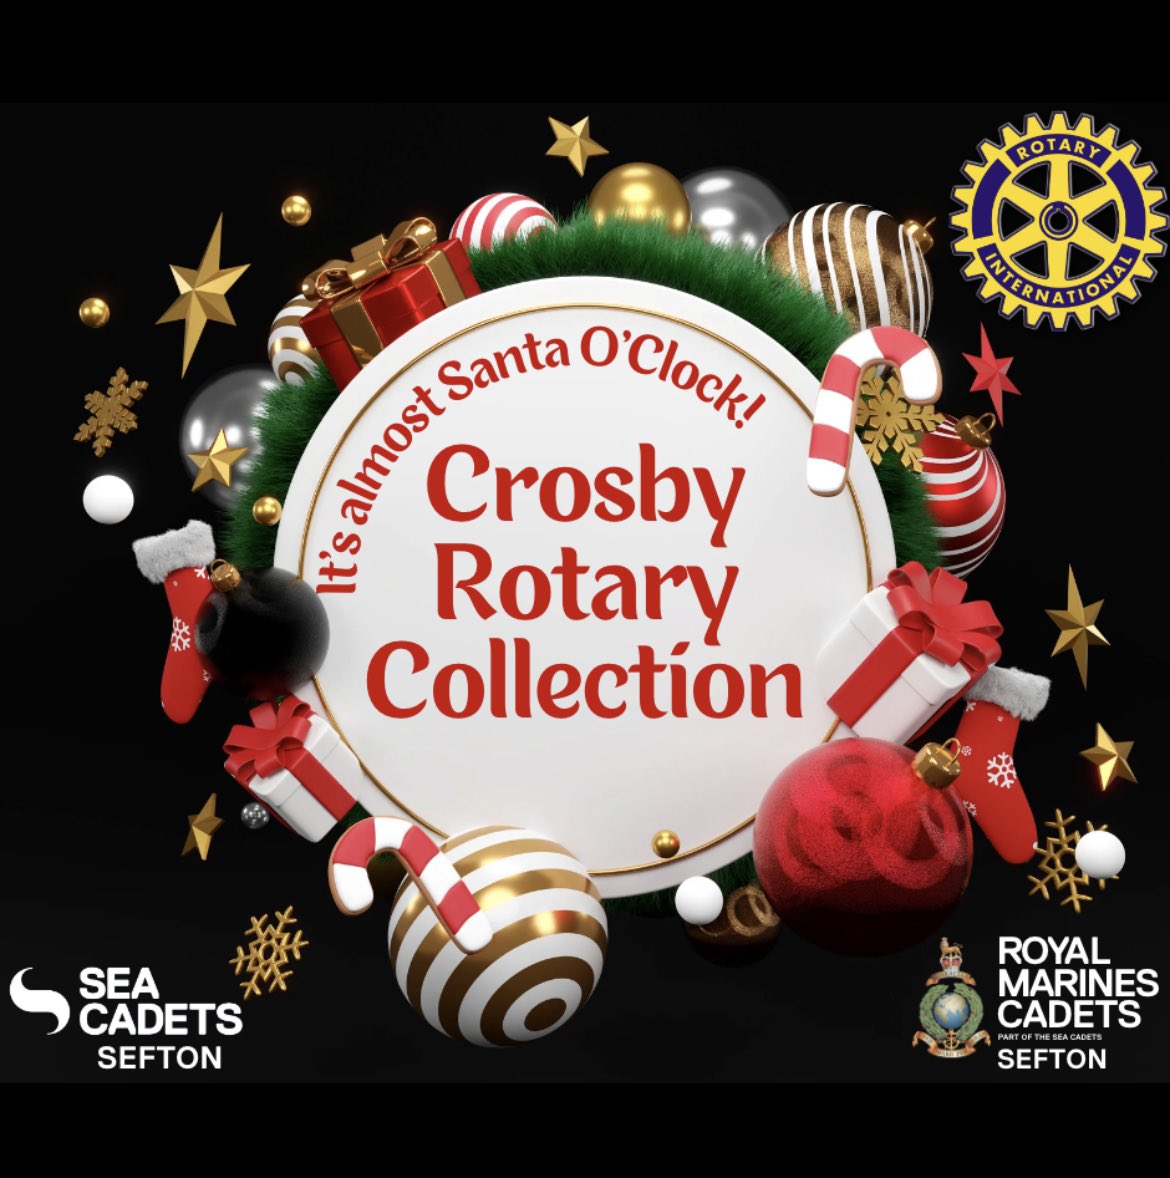 We’re out and about in Crosby tonight supporting our friends at @CrosbyRotary raising funds for local good causes. Please give us a wave if you see us with Santa 🎅🏻 @seftoncouncil @cllrlizdowd @Paulett54122148 @CllrIanMoncur